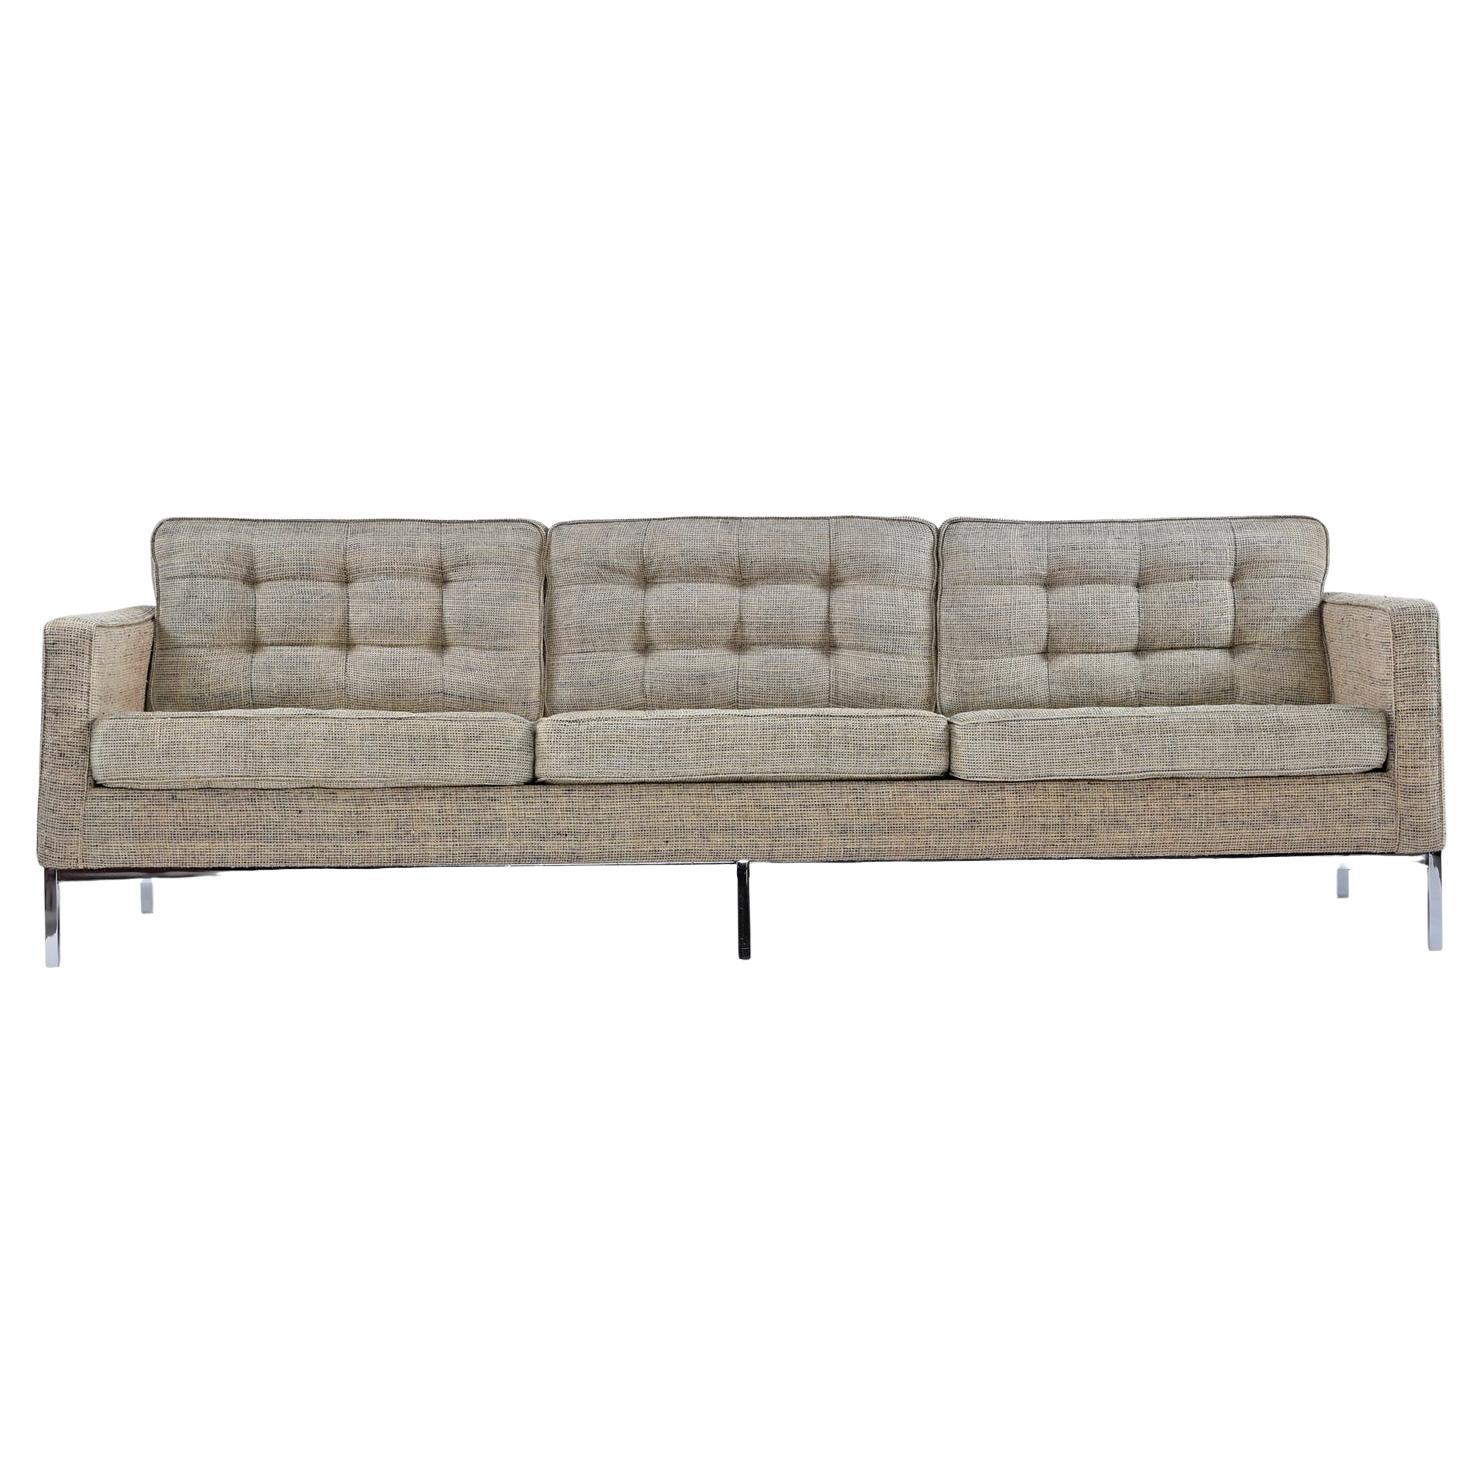 Vintage original Florence Knoll sofa in heather grey tweed fabric. Although unsigned or tagged, this is 100% knoll, and most likely from the 1980's. Purchased from an estate along with matching chair and Herman Miller Walnut Conference Table. The